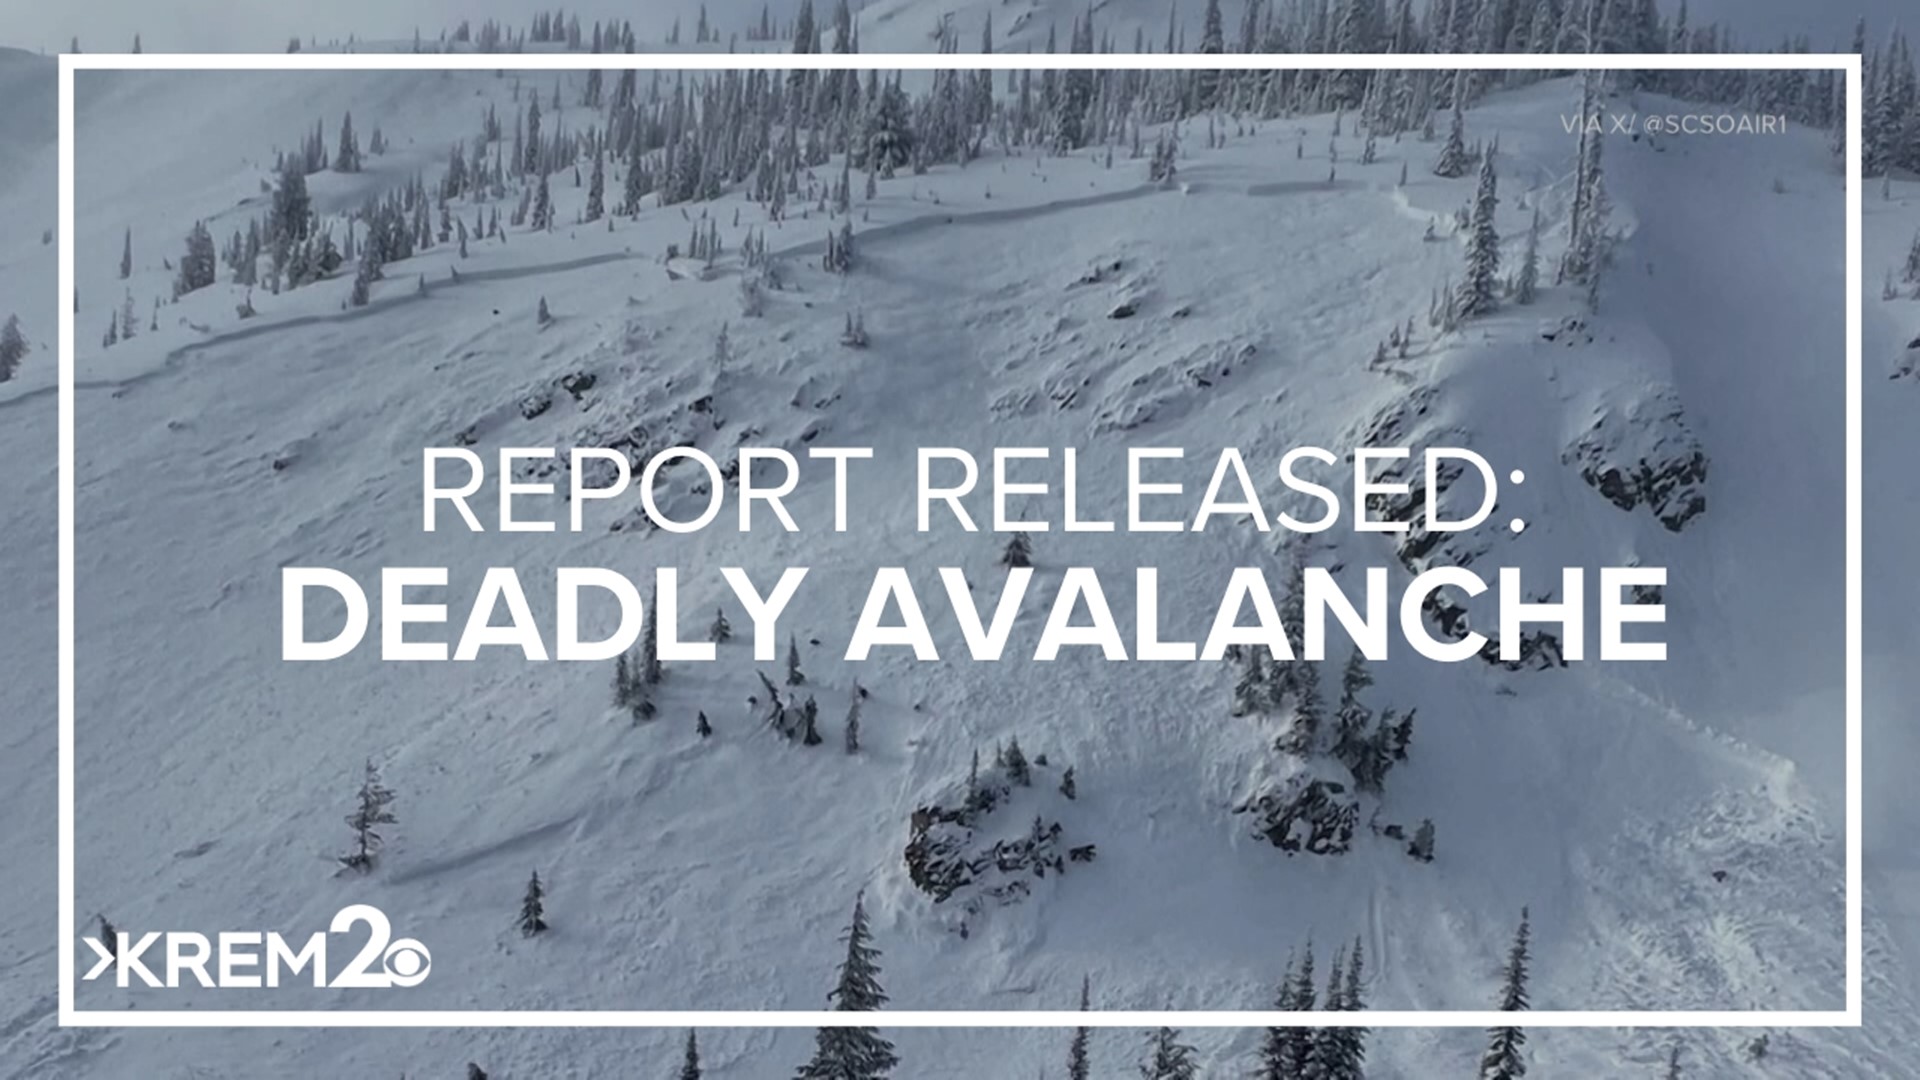 This death is the fifth avalanche death in the area in the past four years.